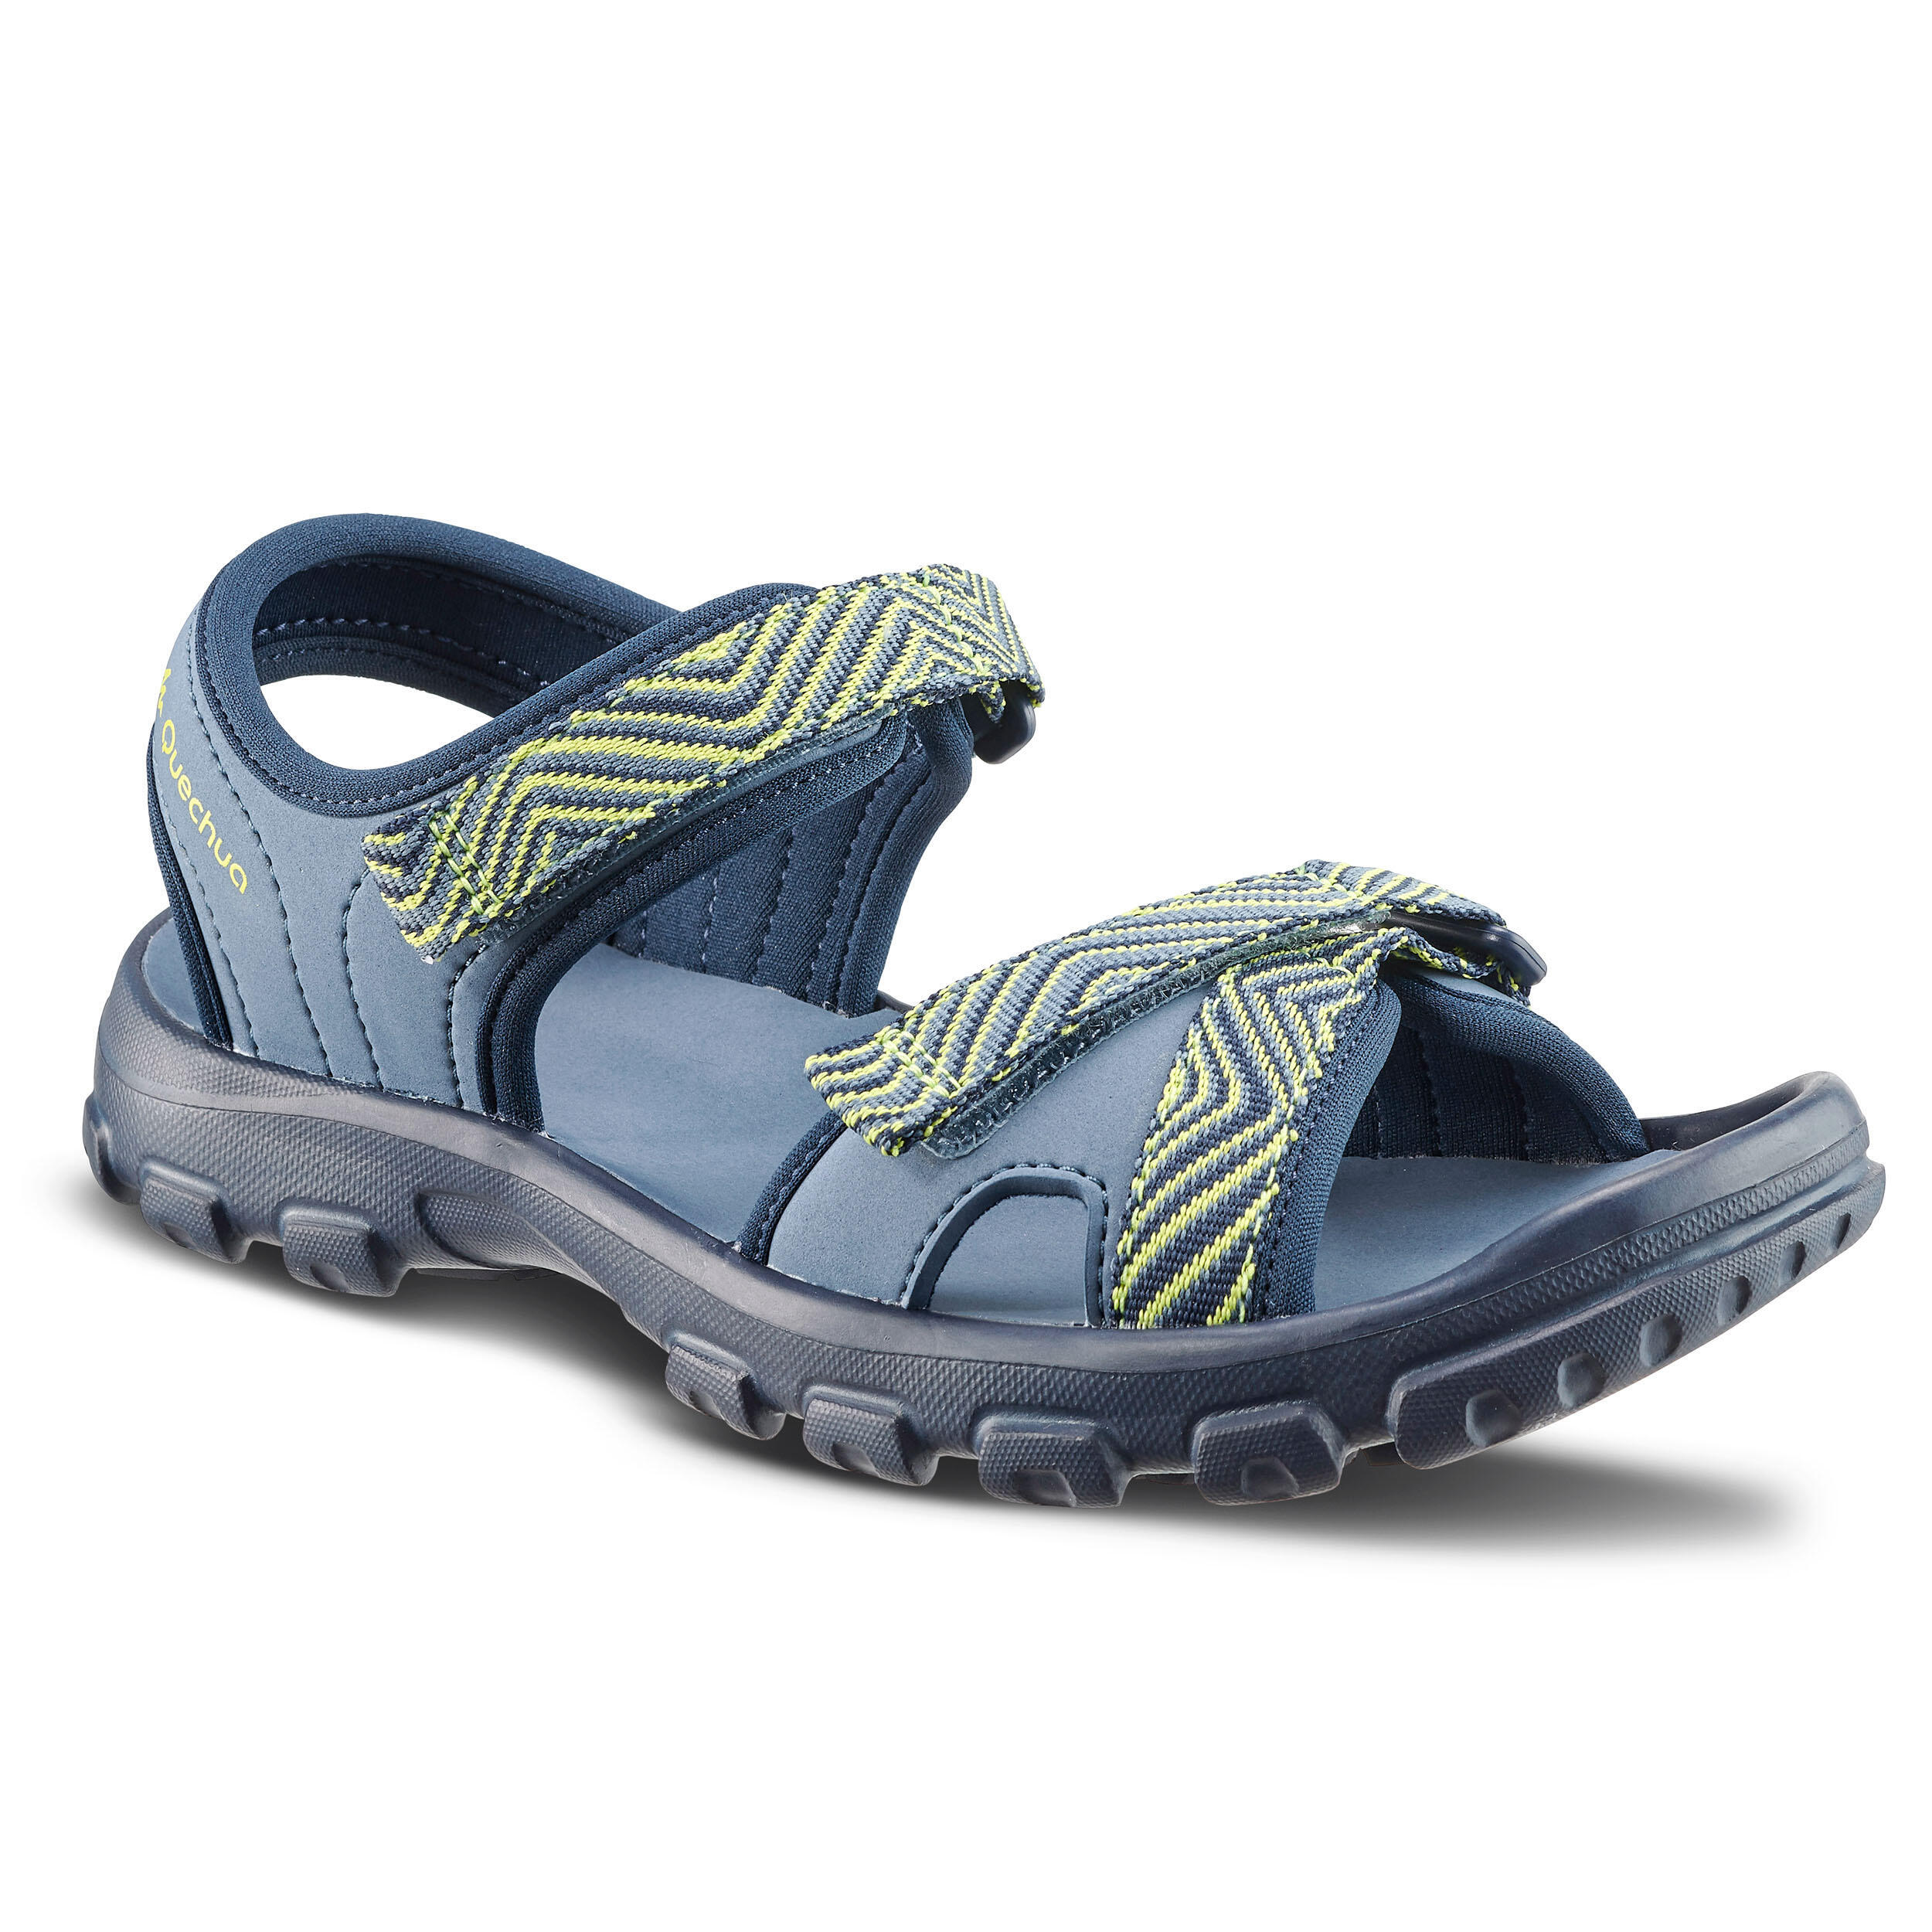 Kids’ Hiking Sandals MH100 TW - Blue and Yellow - Junior UK size 13 to 4 3/9